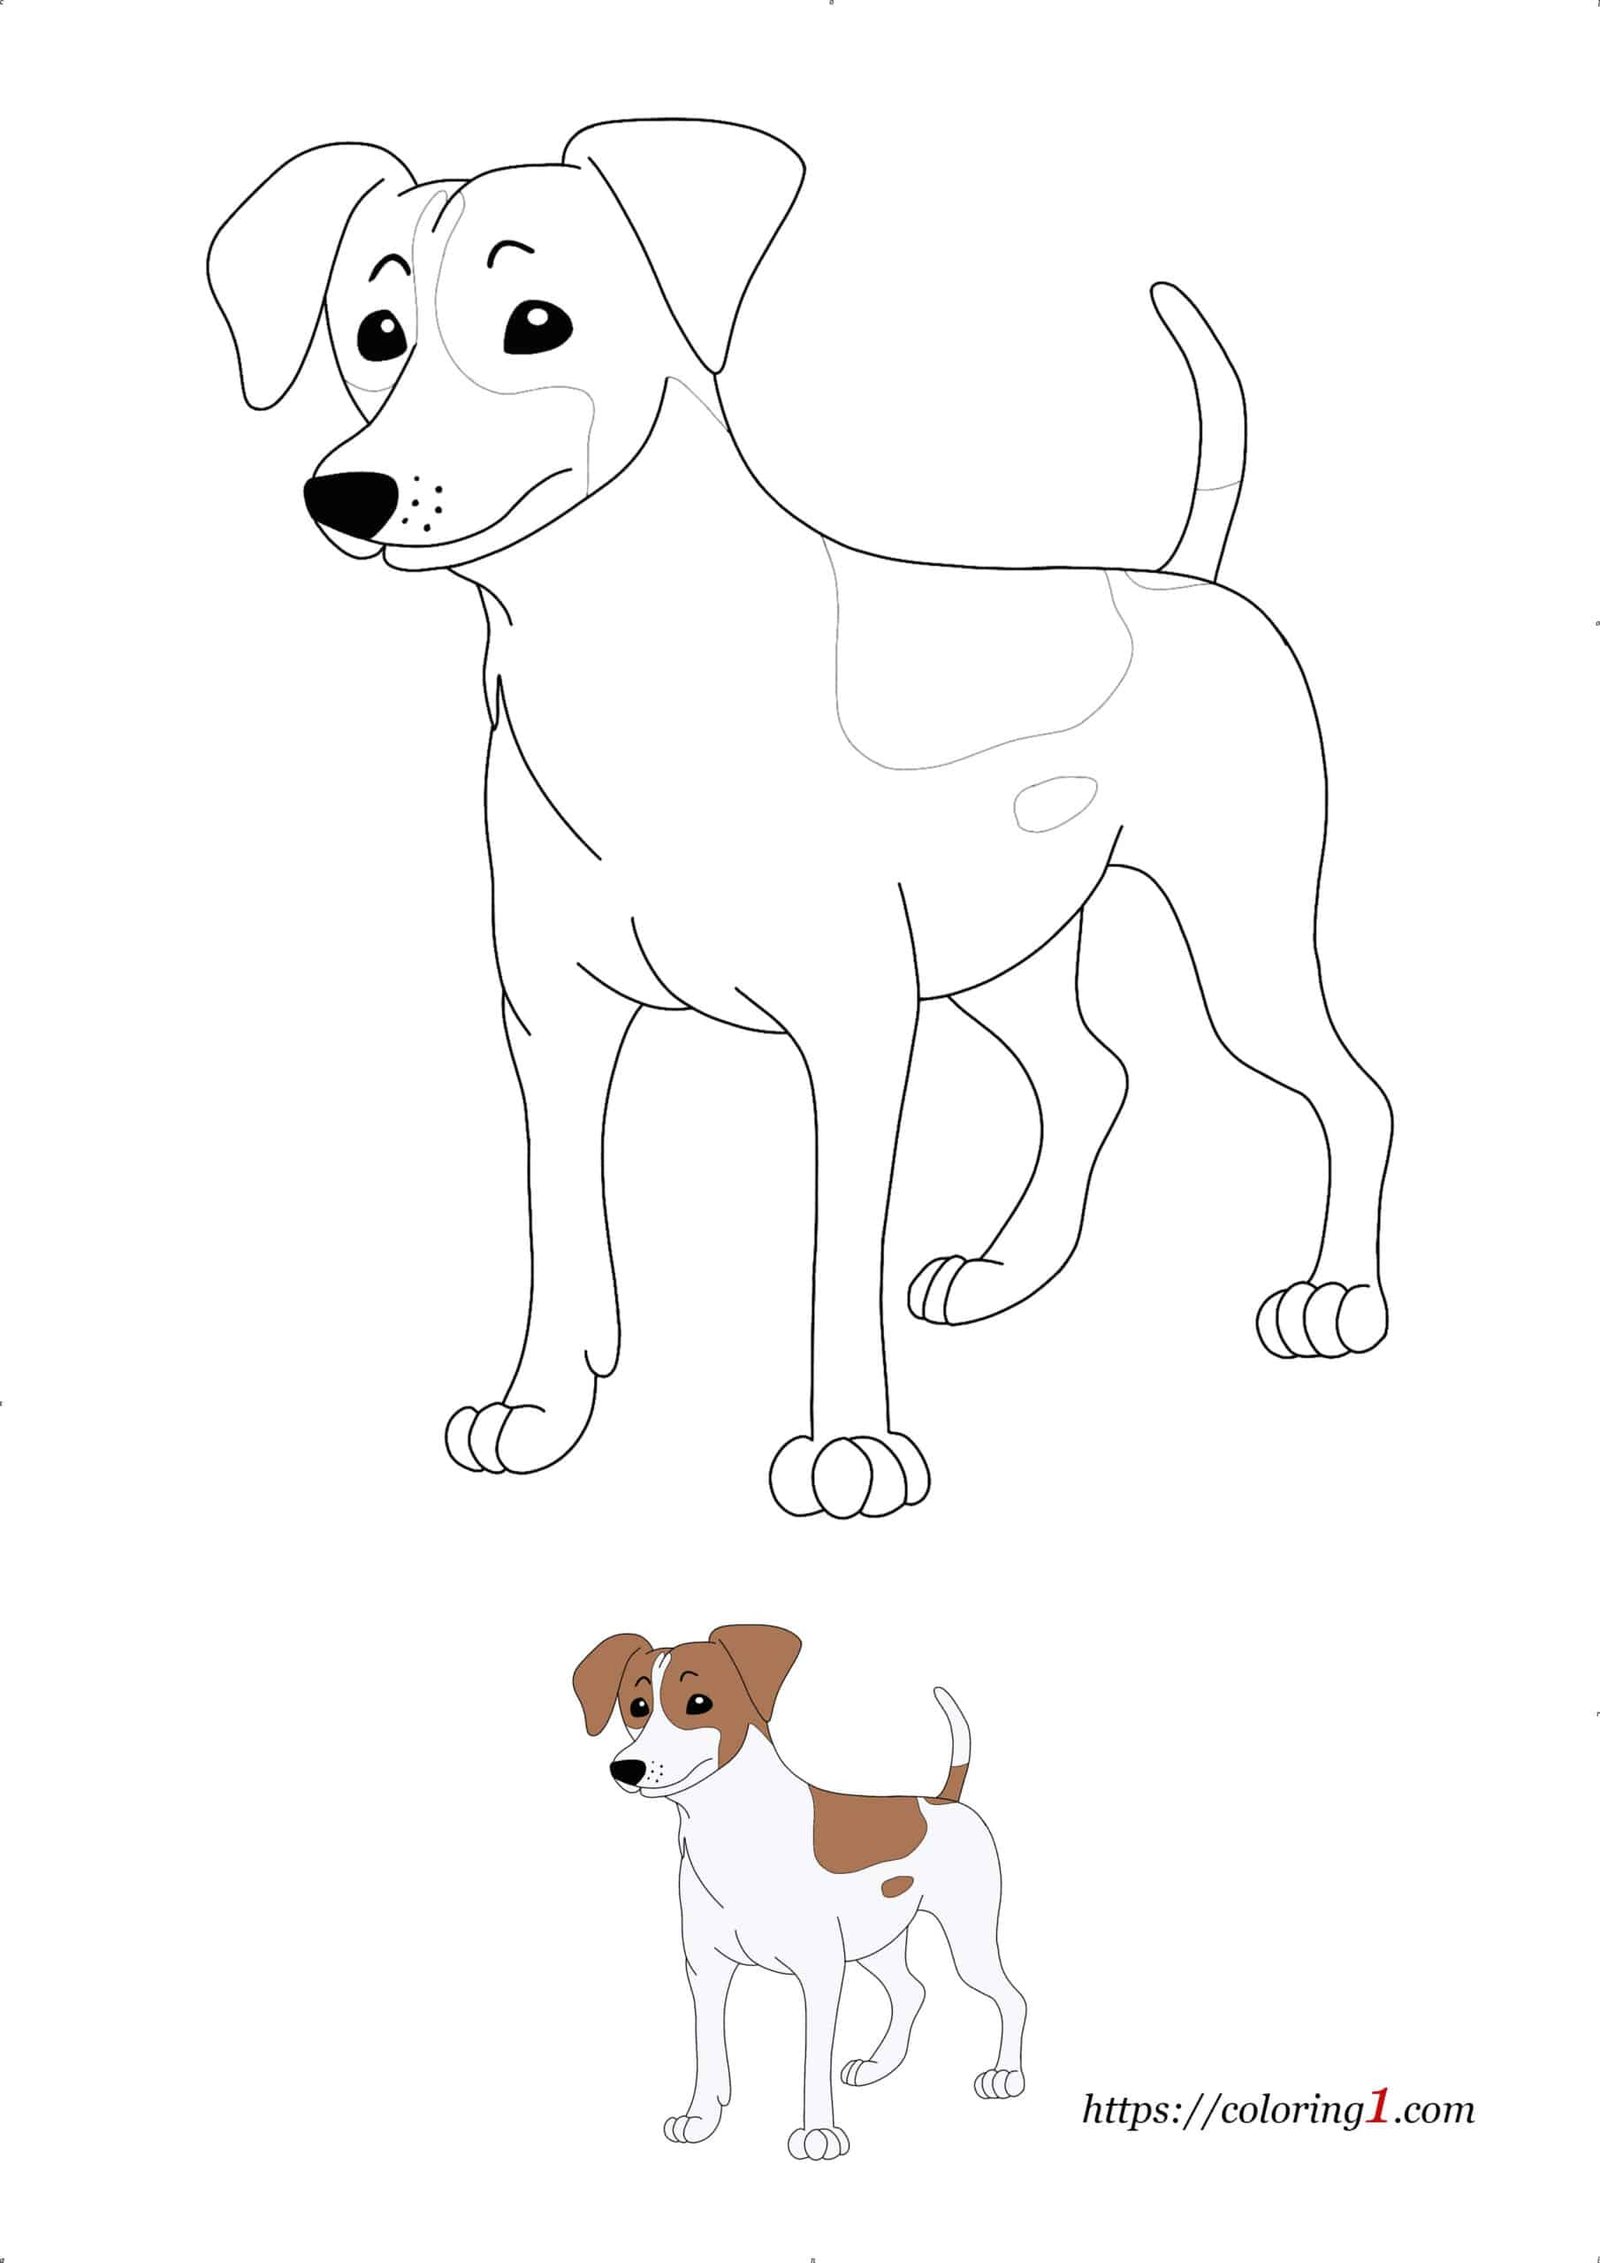 Jack Russel Dog Breed coloring page to print with sample